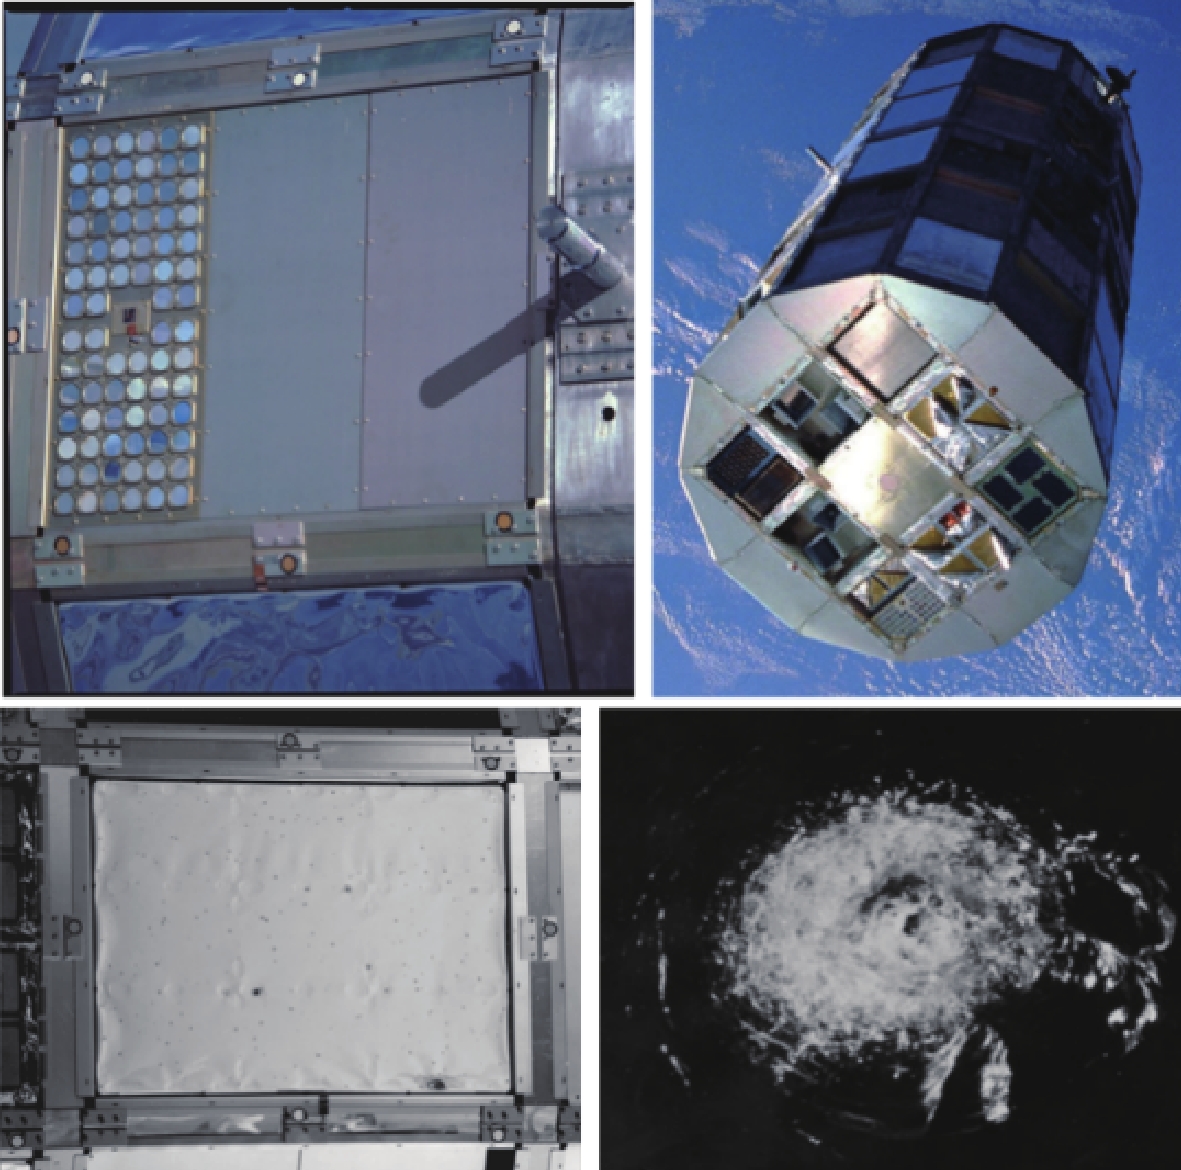 The US LDEF project and the collision morphology due to space debris